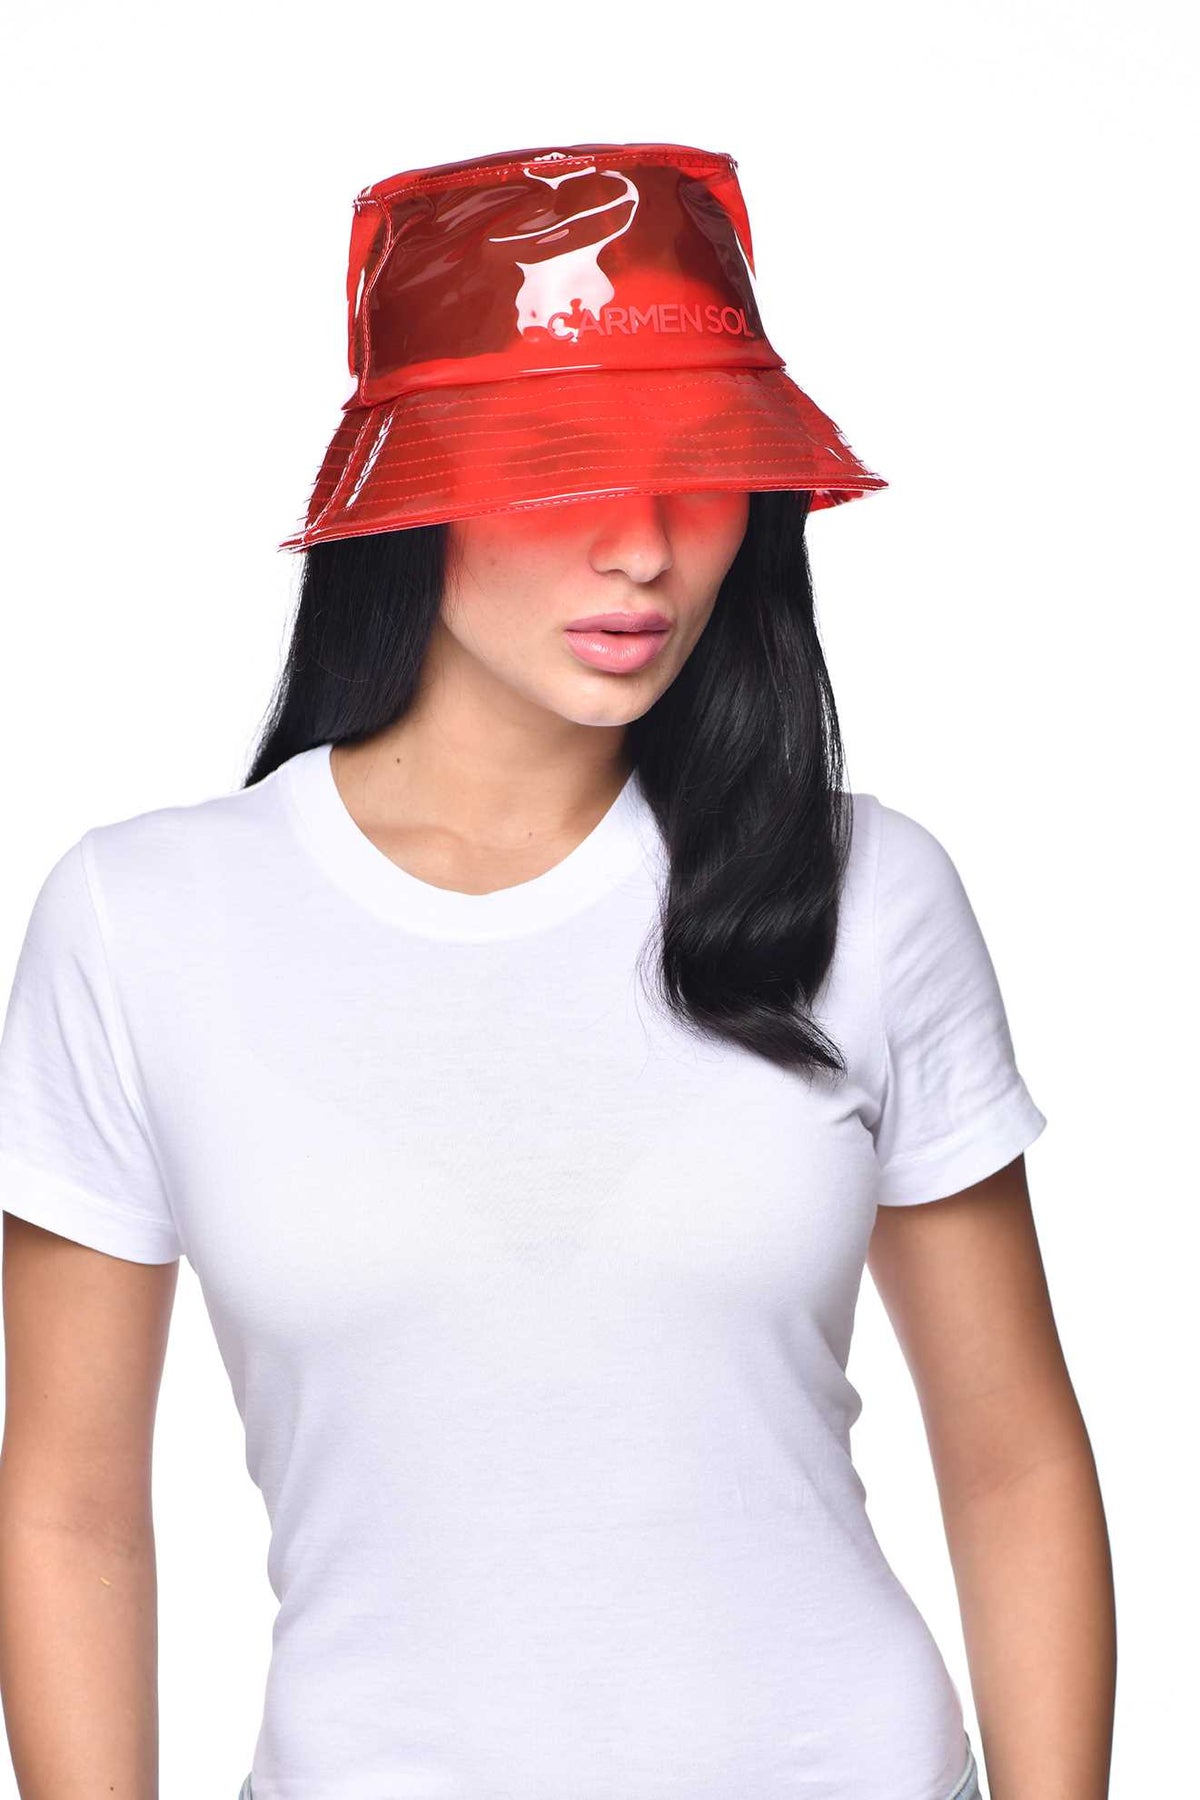 Raquel jelly bucket hat womens in color red from Carmen Sol